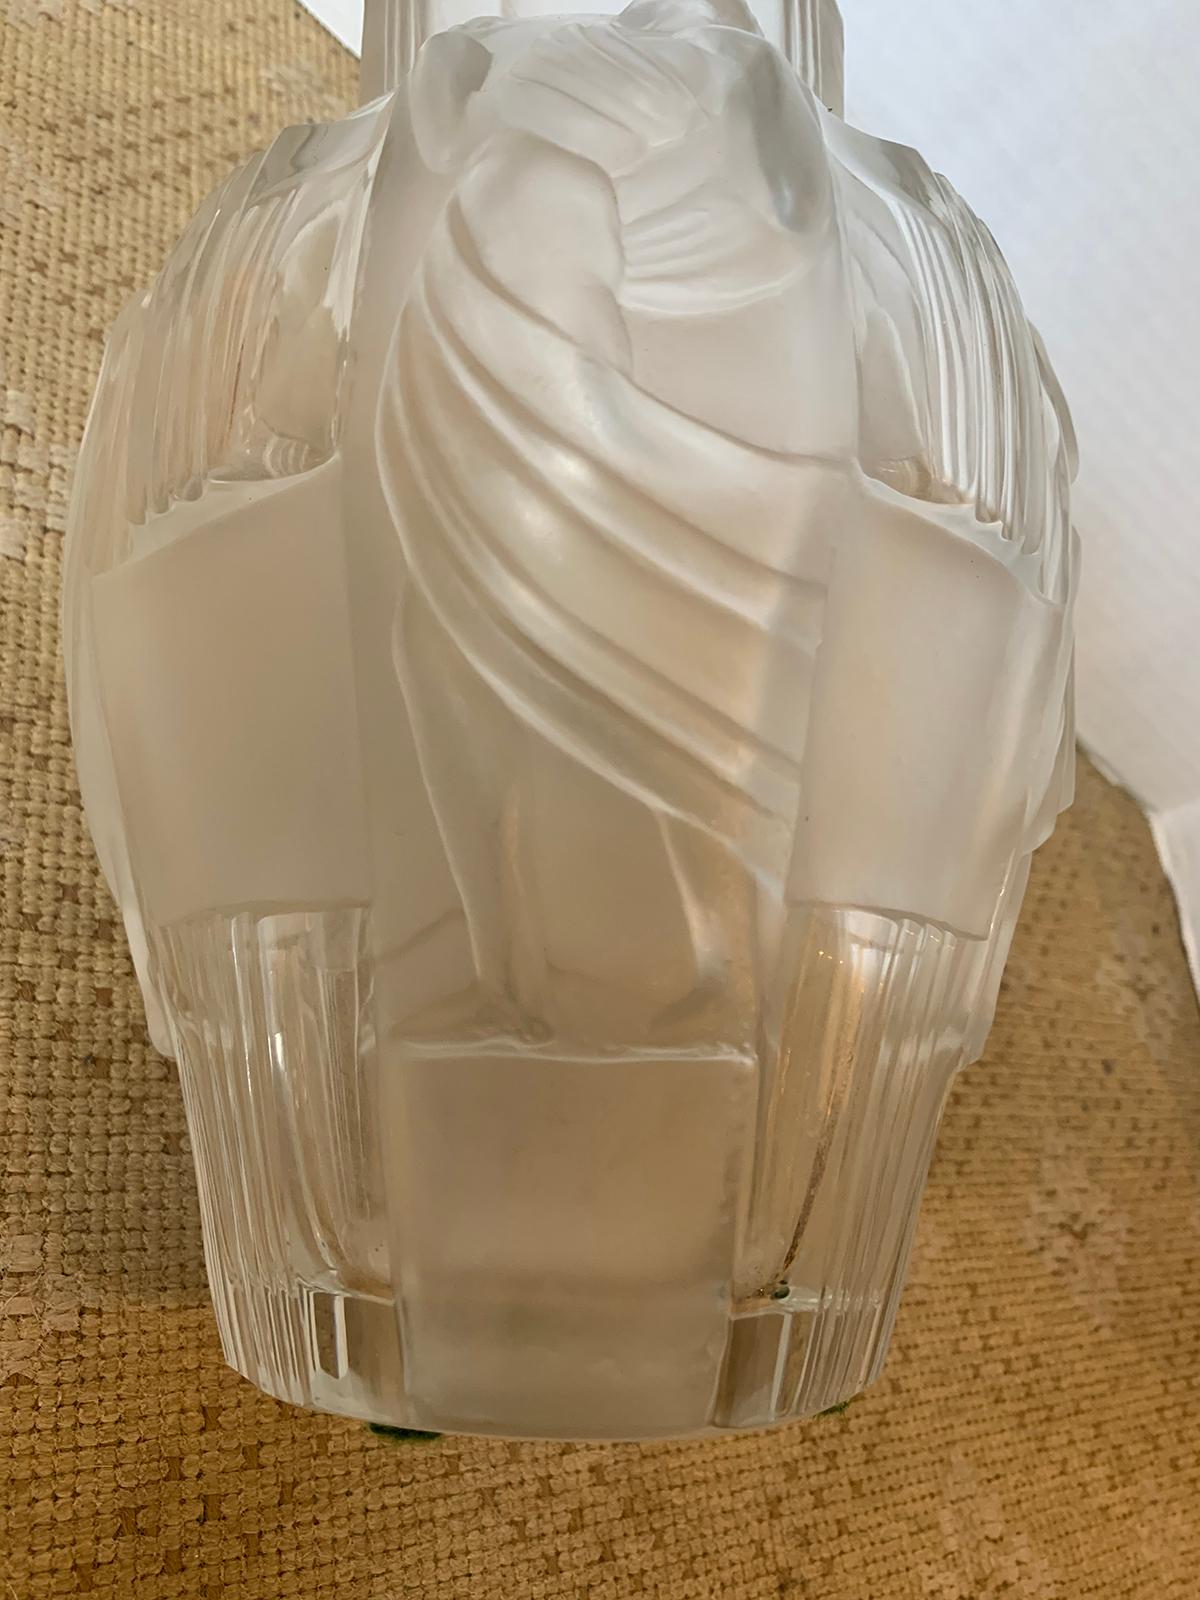 20th Century Art Deco Style Glass Vase For Sale 5